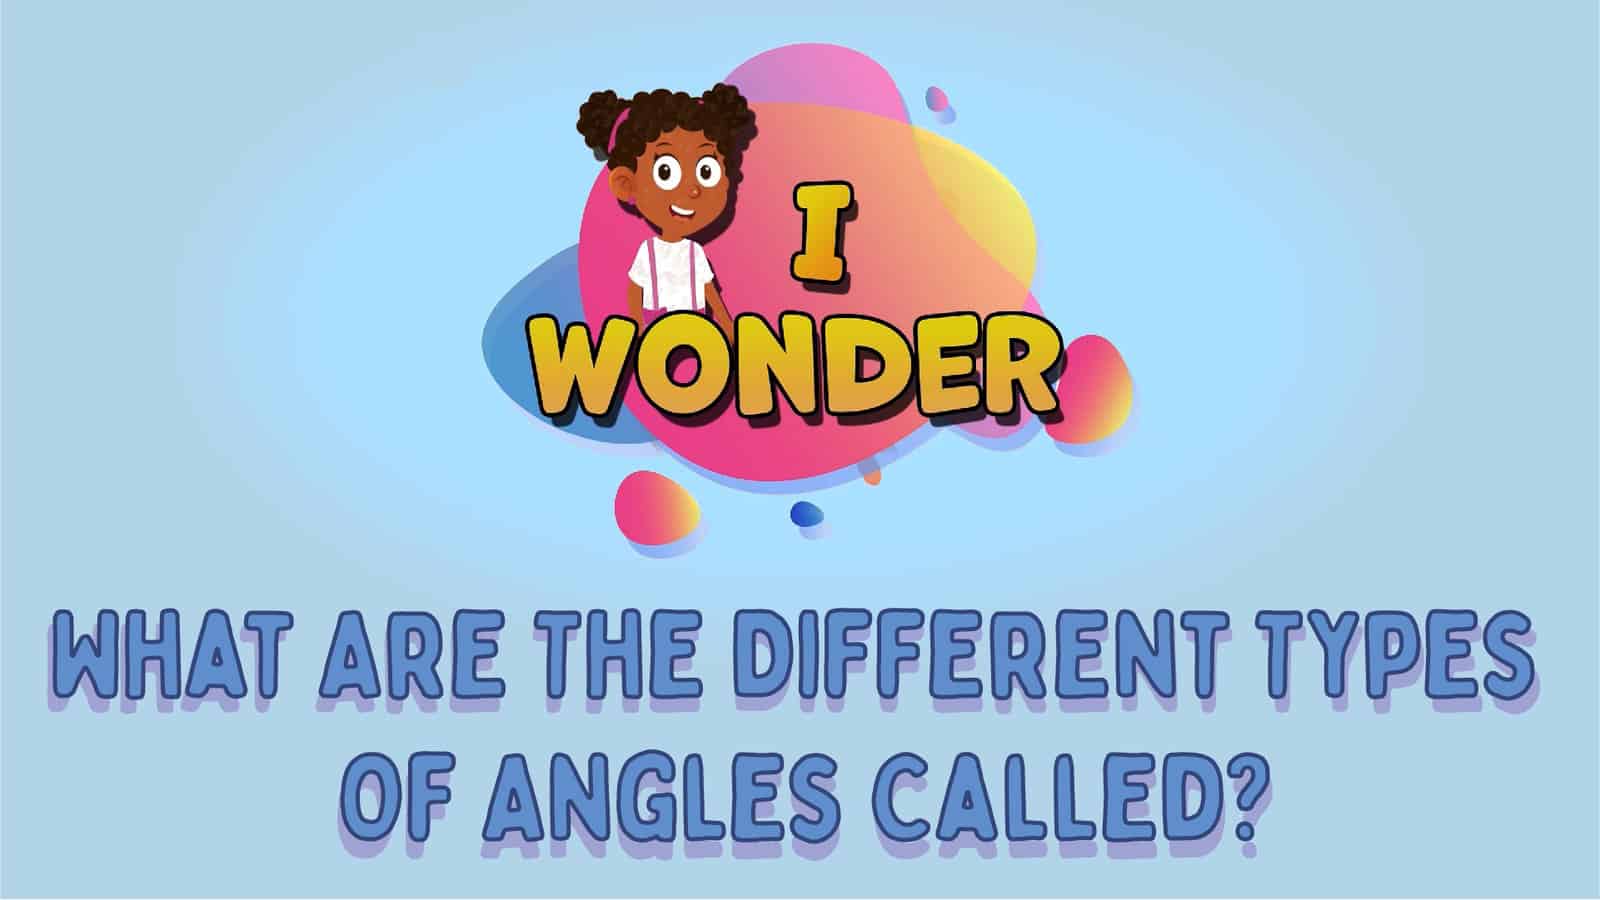 What Are The Different Types Of Angles Called?